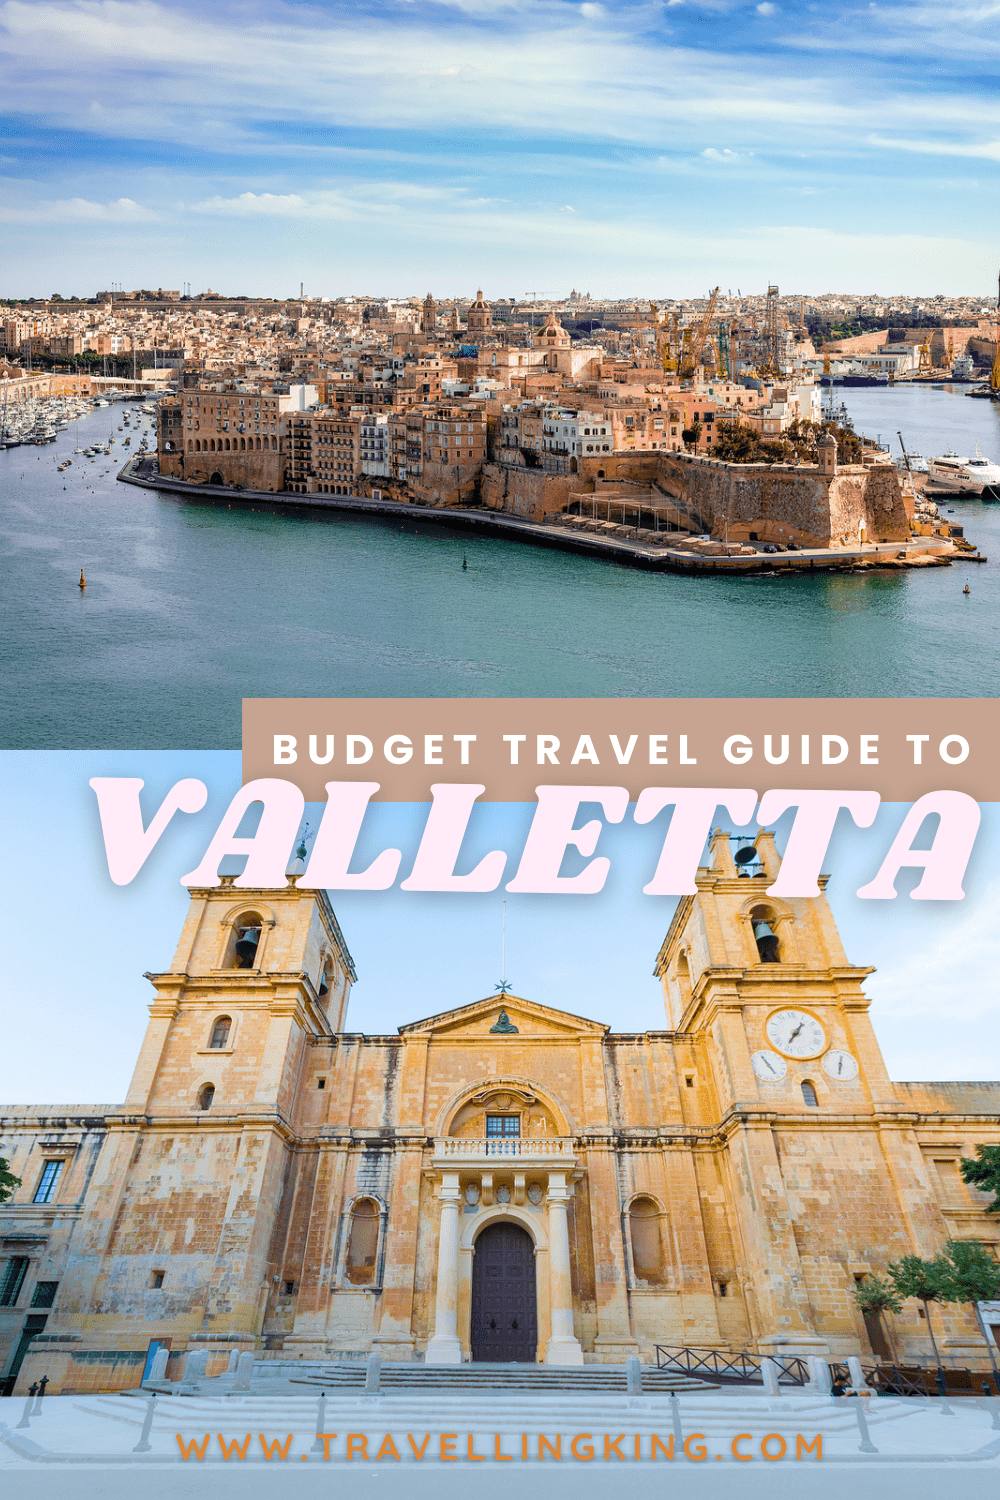 Budget Travel Guide to Valletta